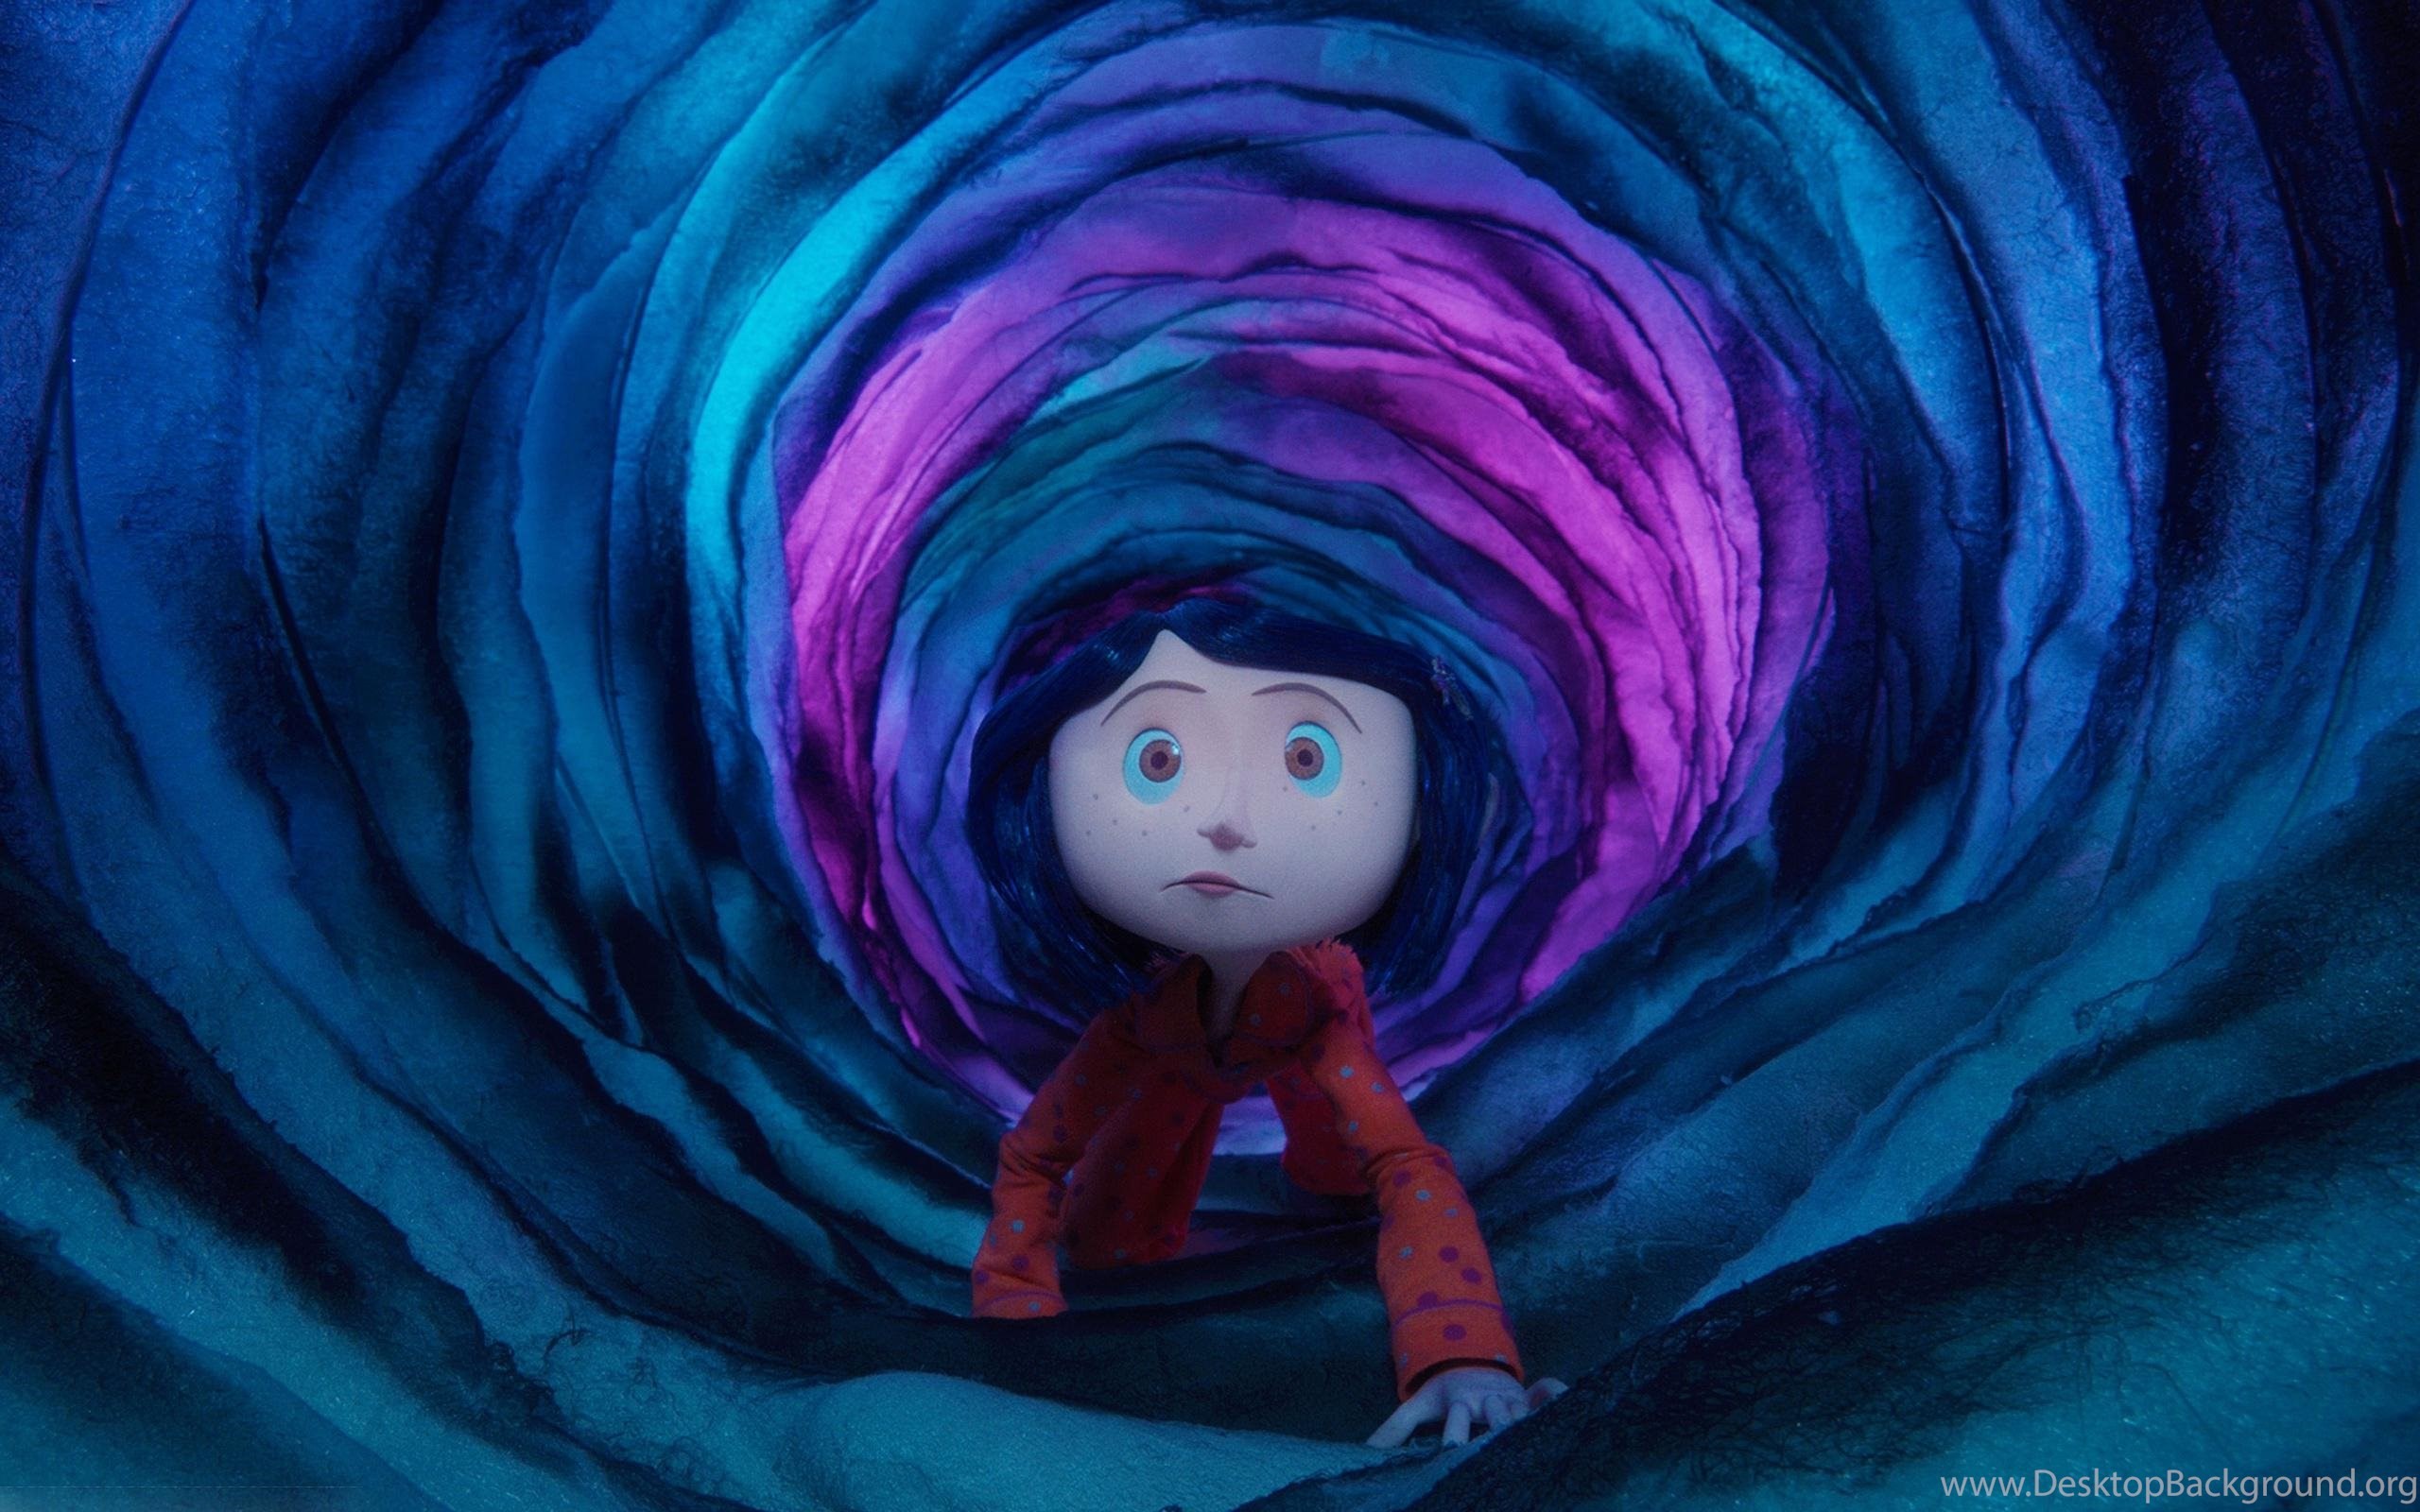 Coraline 4K wallpapers for your desktop or mobile screen free and easy to  download